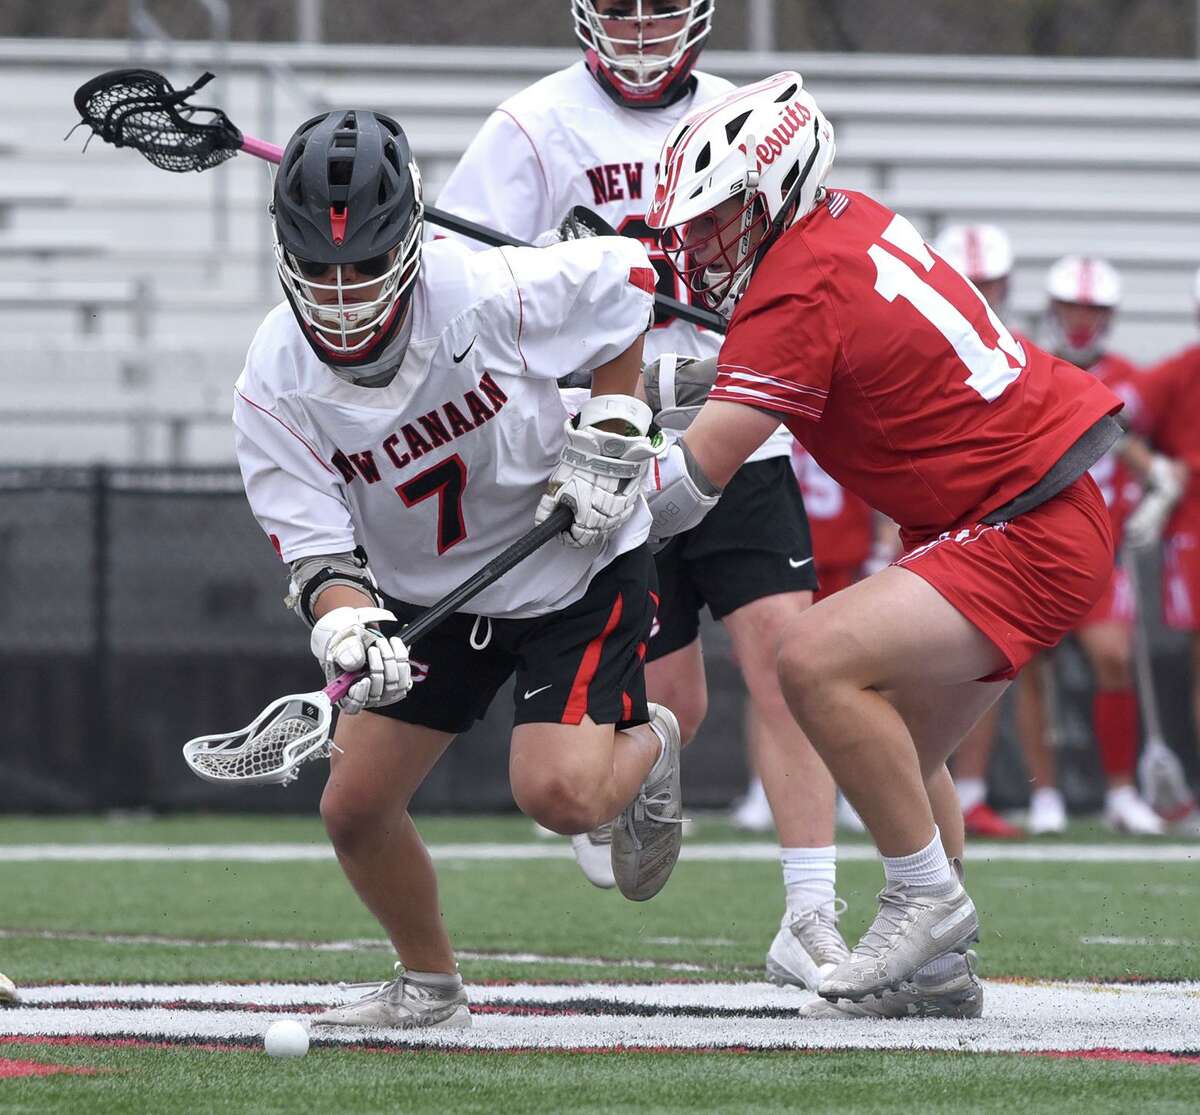 New Canaan's Hayden Shin (7) and Fairfield Prep's Ted Bednar (17) scramble for the ball on a faceoff during a boys lacrosse game at Dunning Field on Monday, April 19, 2021.